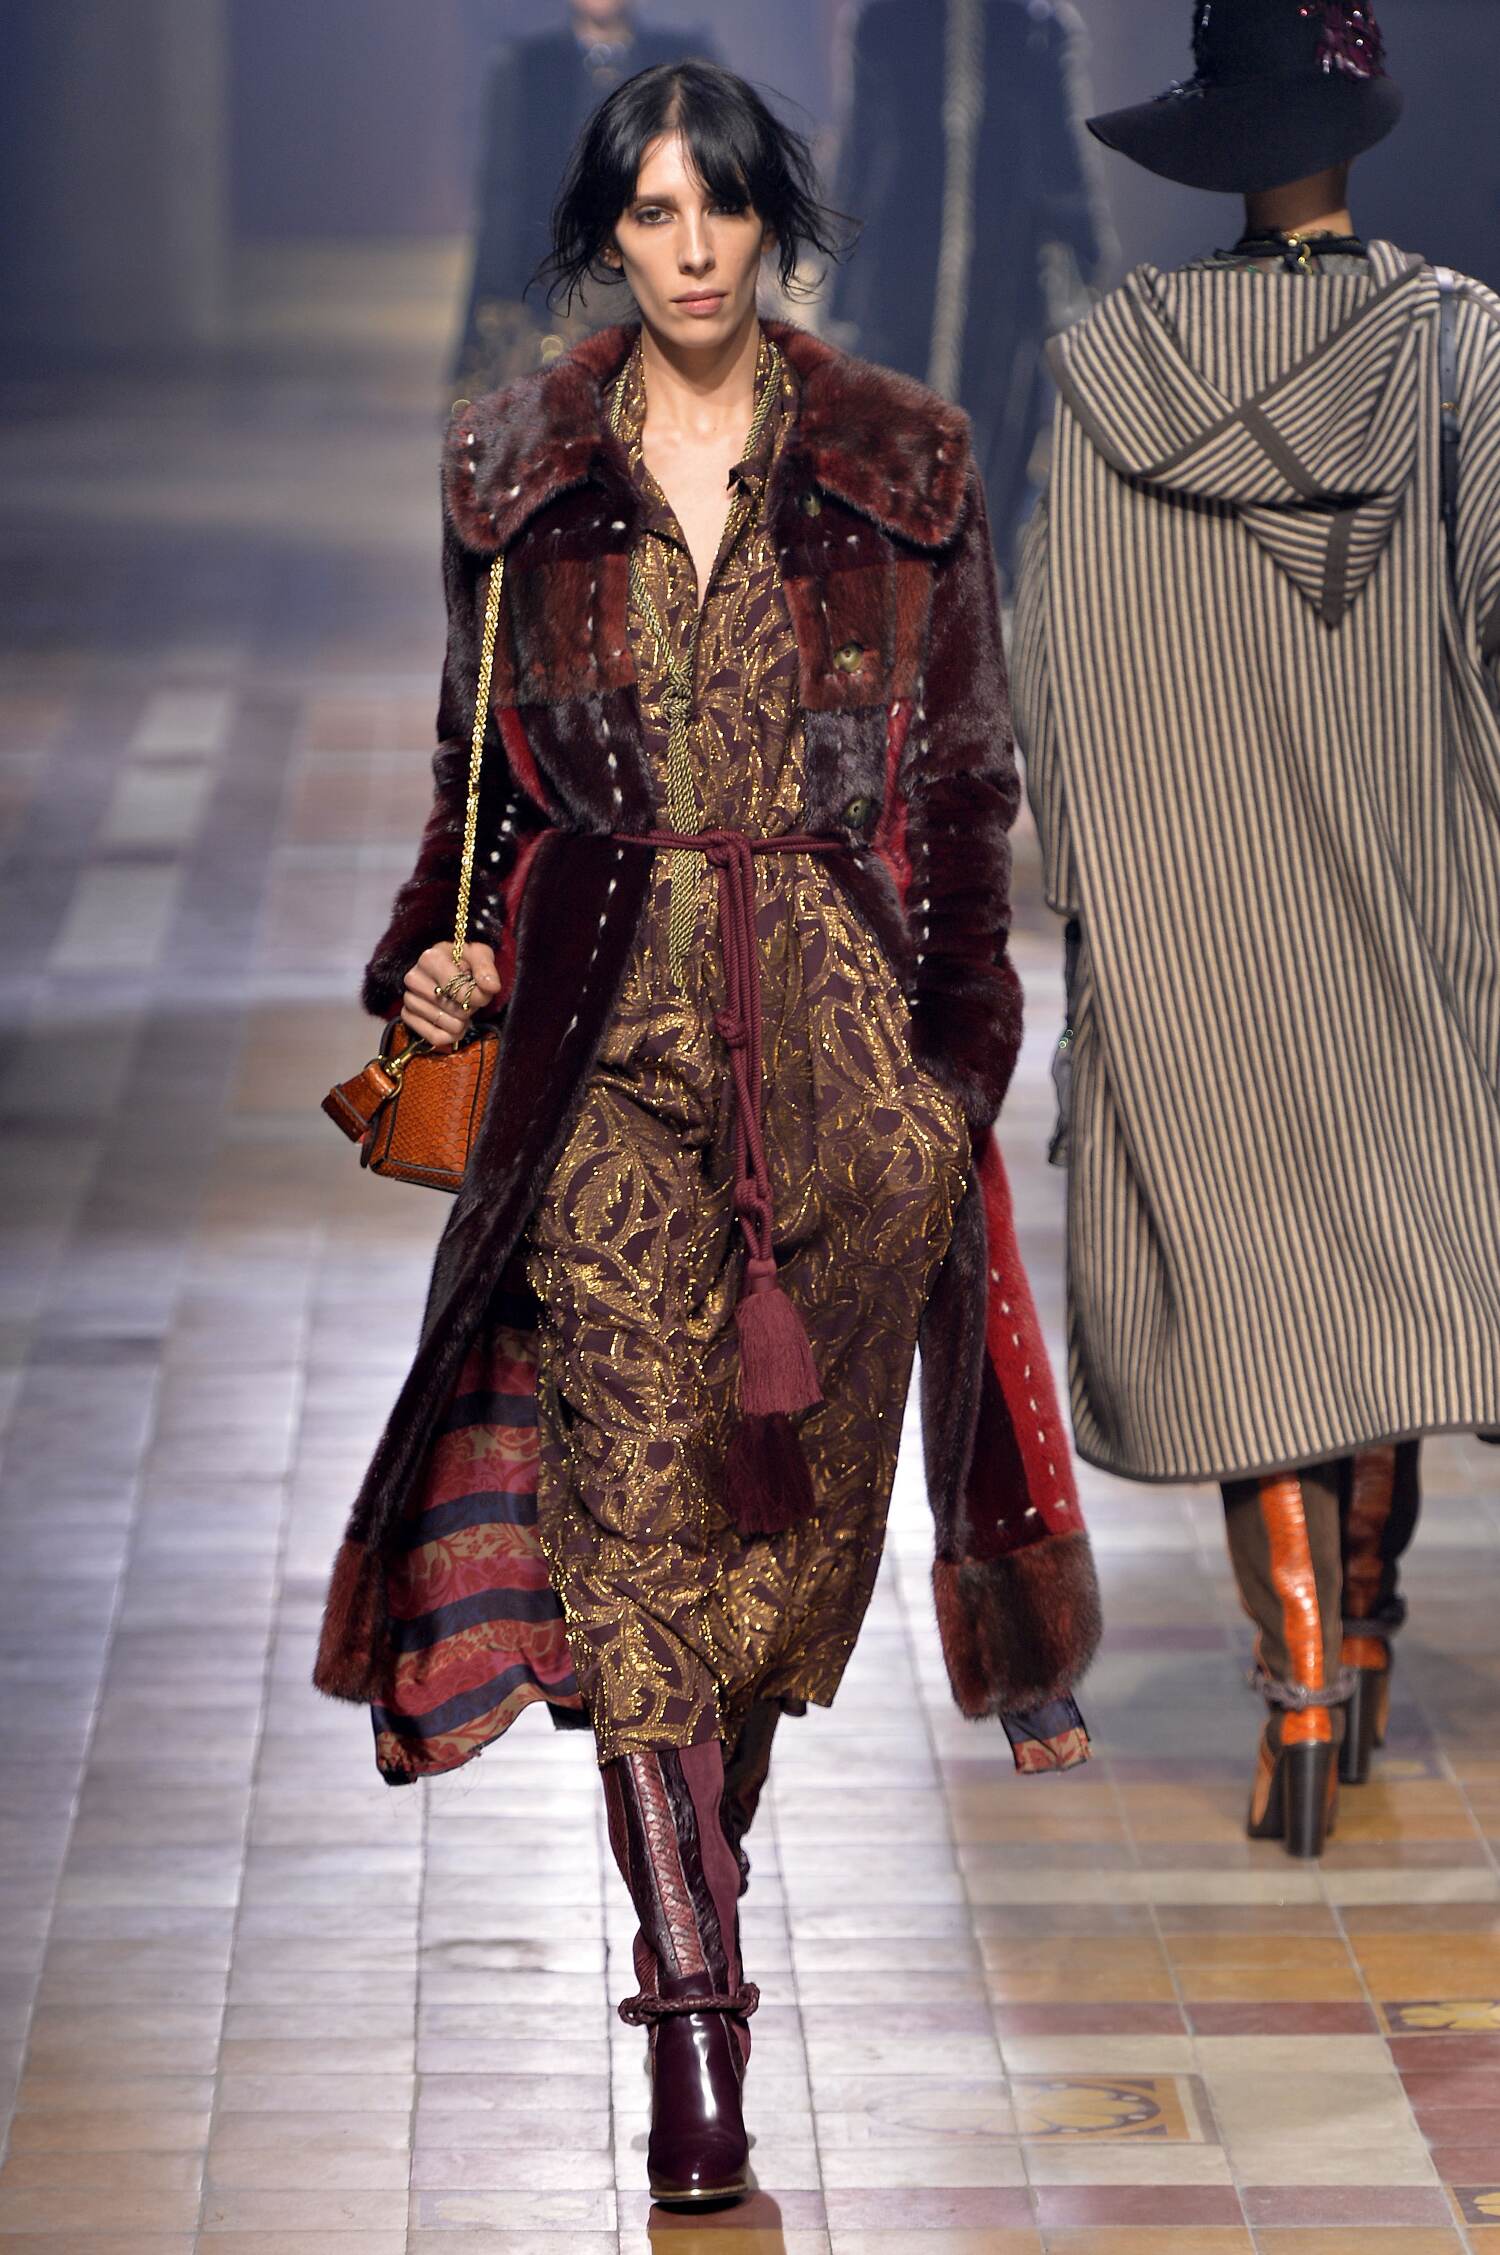 LANVIN FALL WINTER 2015-16 WOMEN’S COLLECTION | The Skinny Beep